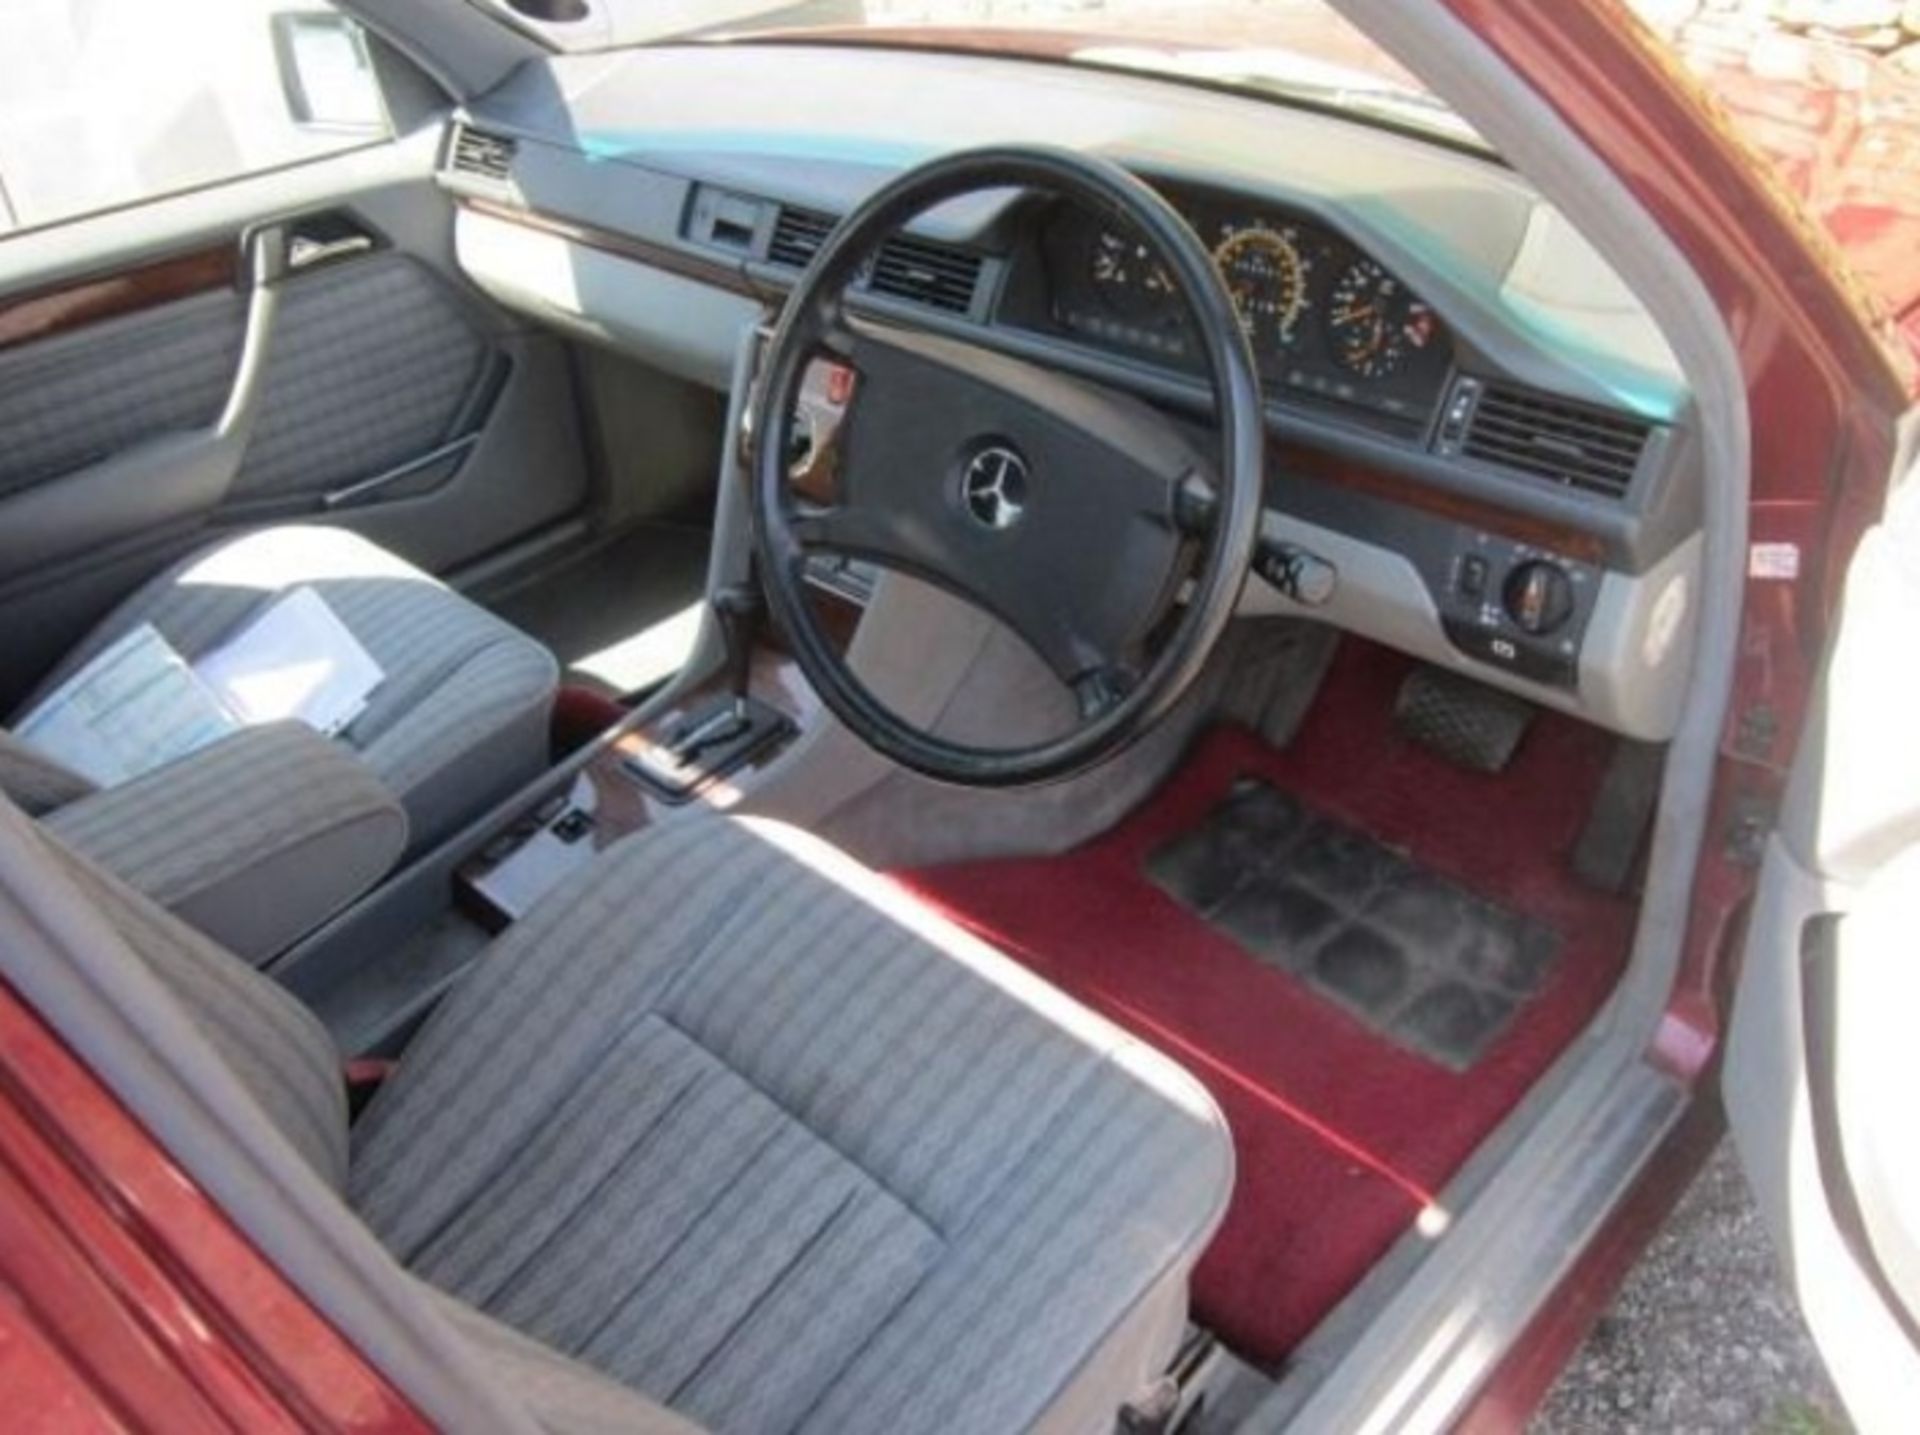 1980 Mercedes-Benz 300 E – 4 Matic (4WD) (Metallic Ruby Red) - Image 9 of 14